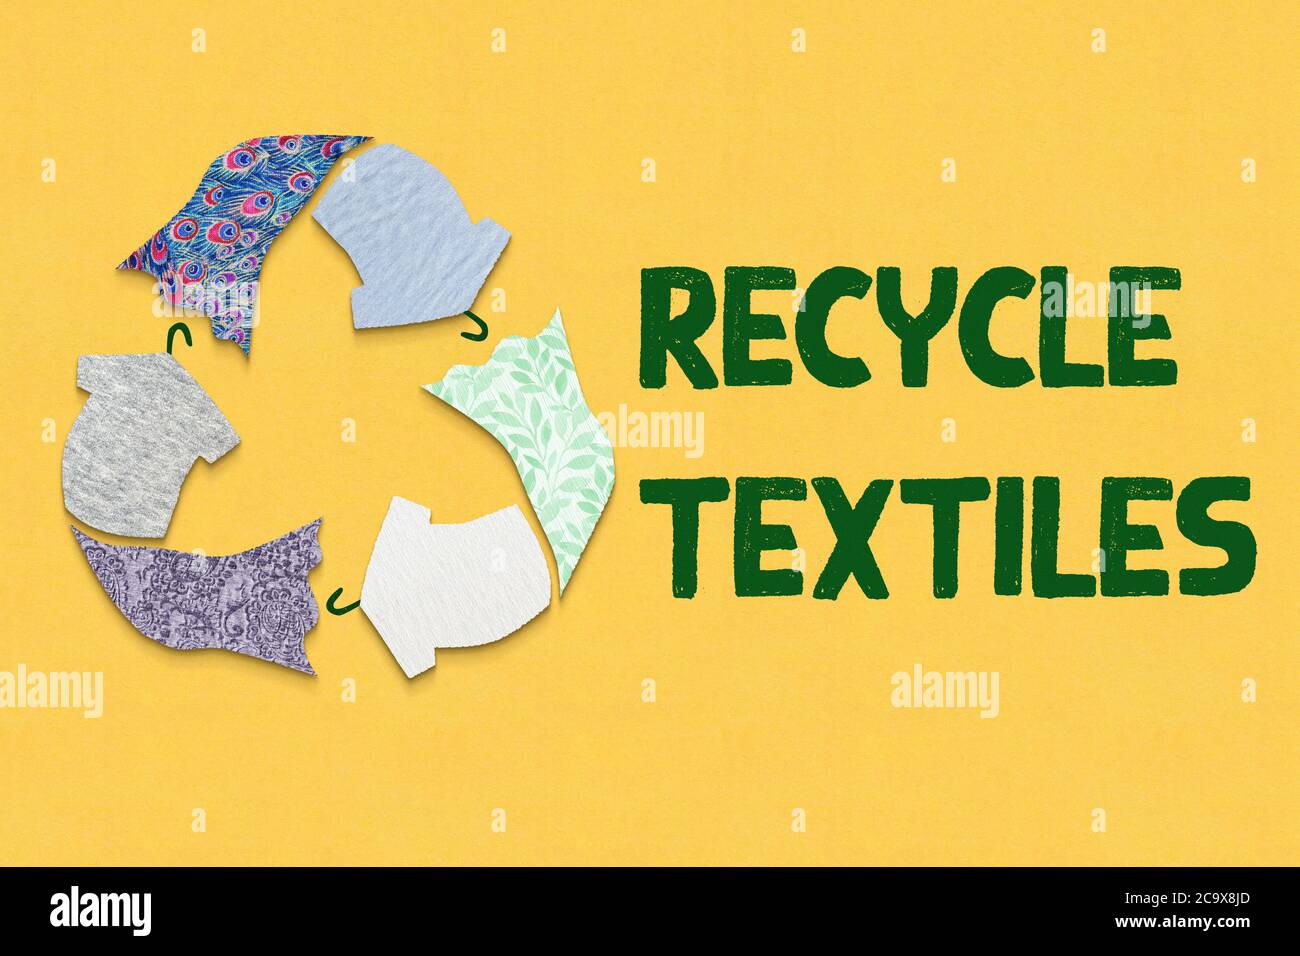 Recycle textiles symbol made from old clothing fabric on yellow background with Textiles text. Top view or flat lay. Reuse, reduce, recycle fo Stock - Alamy